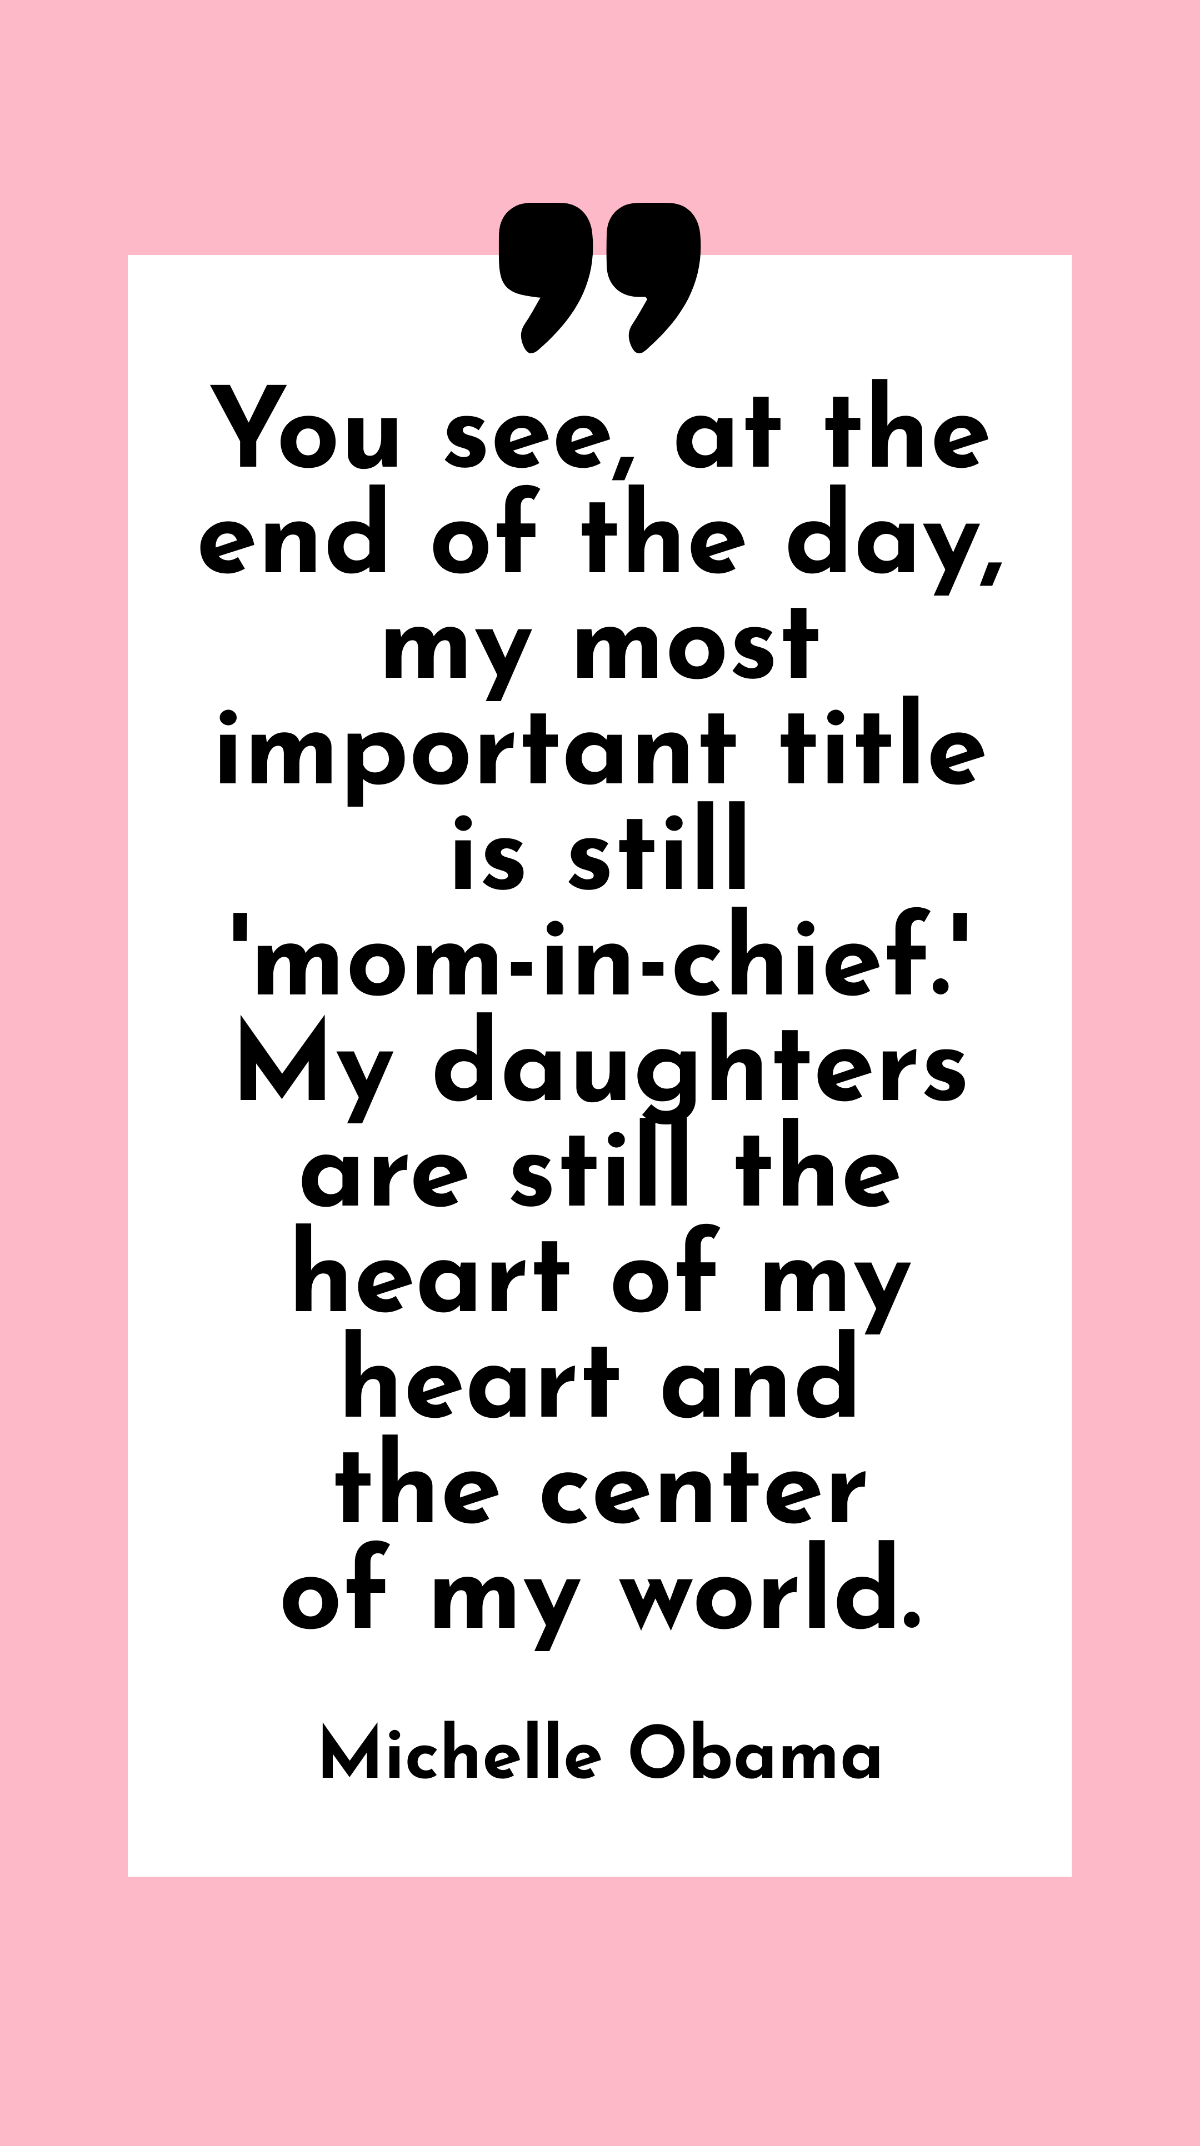 Michelle Obama - You see, at the end of the day, my most important title is still 'mom-in-chief.' My daughters are still the heart of my heart and the center of my world. Template